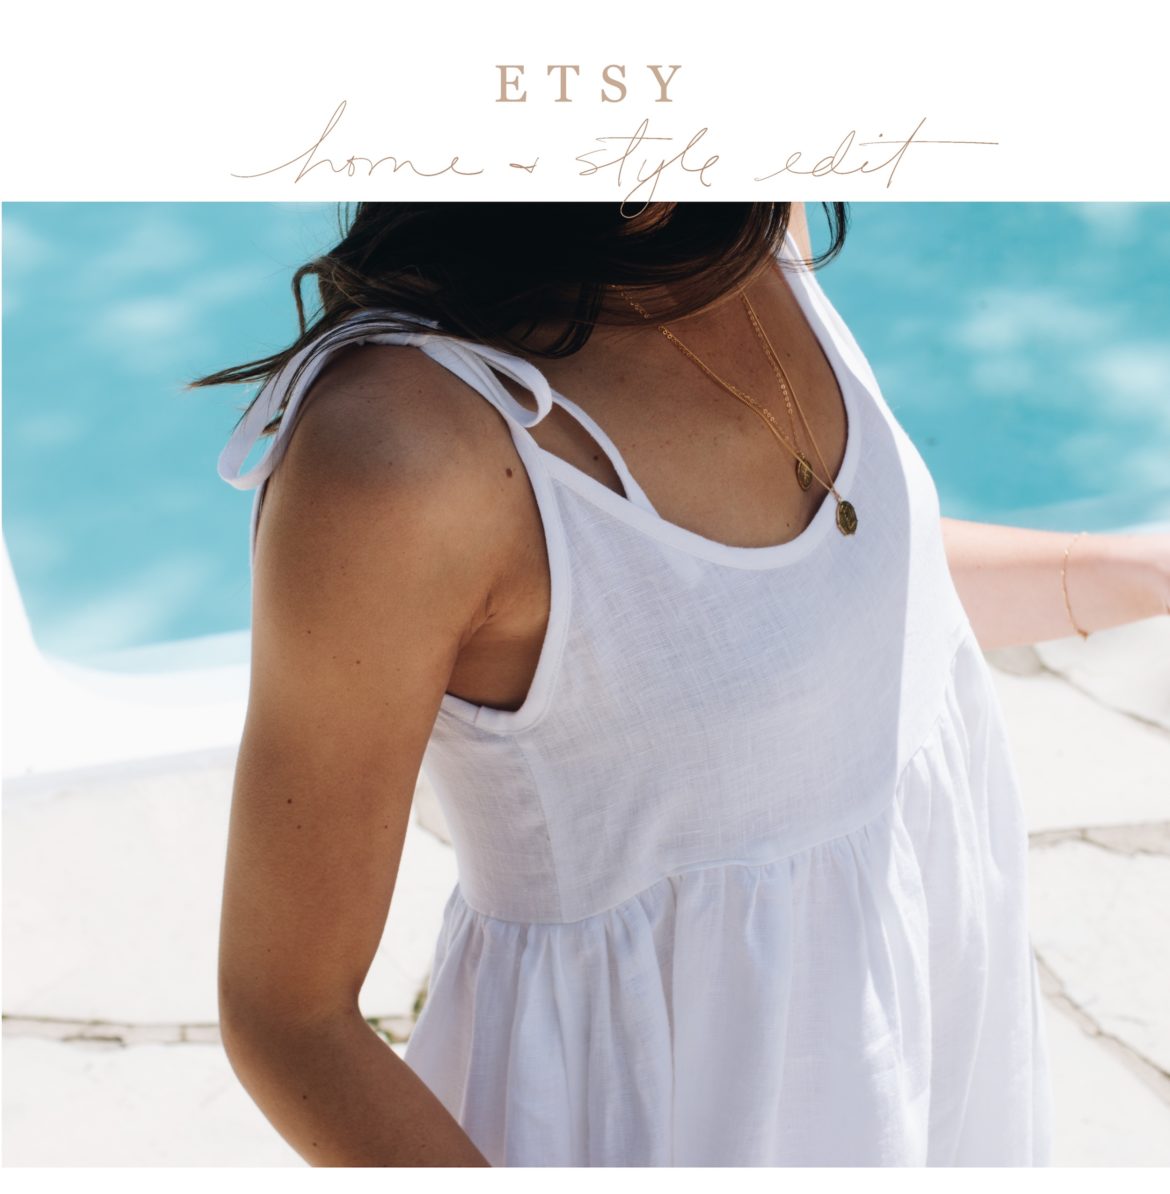 We have a main squeeze. ETSY. We were selected to be a guest editors of ✨The Etsy Edit ✨and are sharing our allllll time faves here. Get ready. So good. So so so so good. Years ago, we discovered Etsy and have never looked back. www.lynneknowlton.com